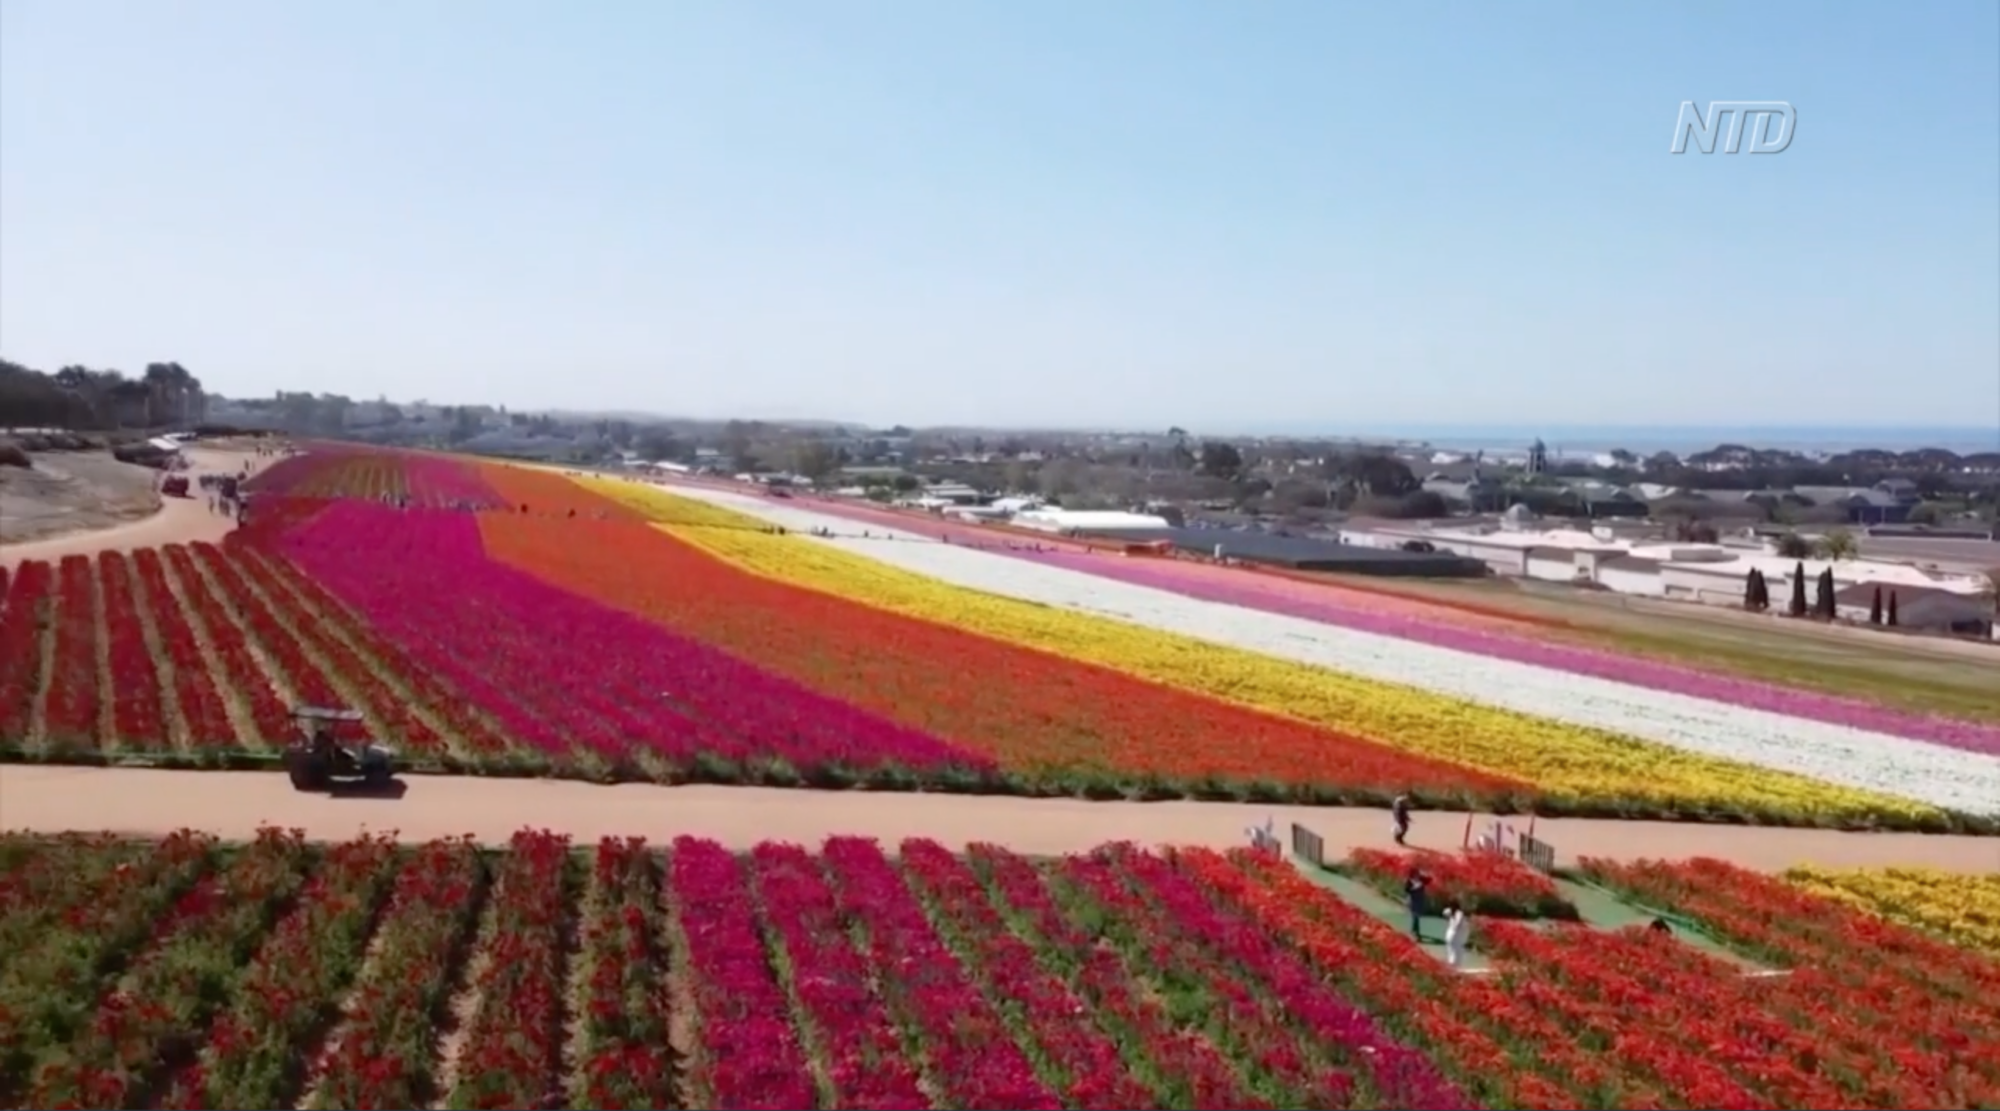 Visitors Flock to California’s Flower Fields